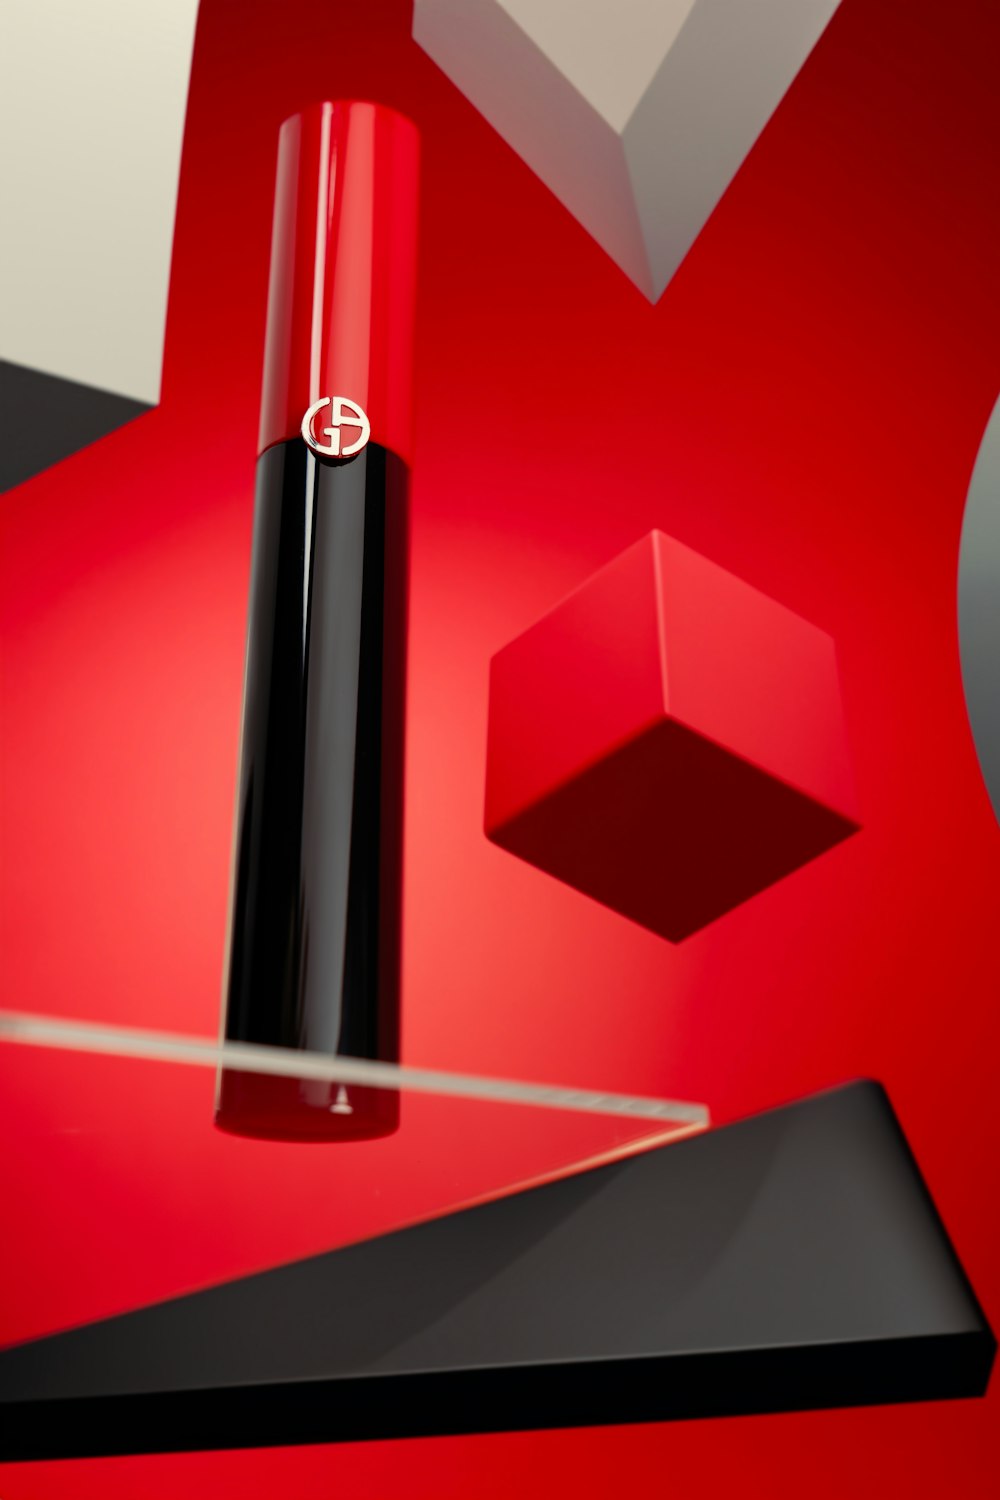 a red and black object on a red surface